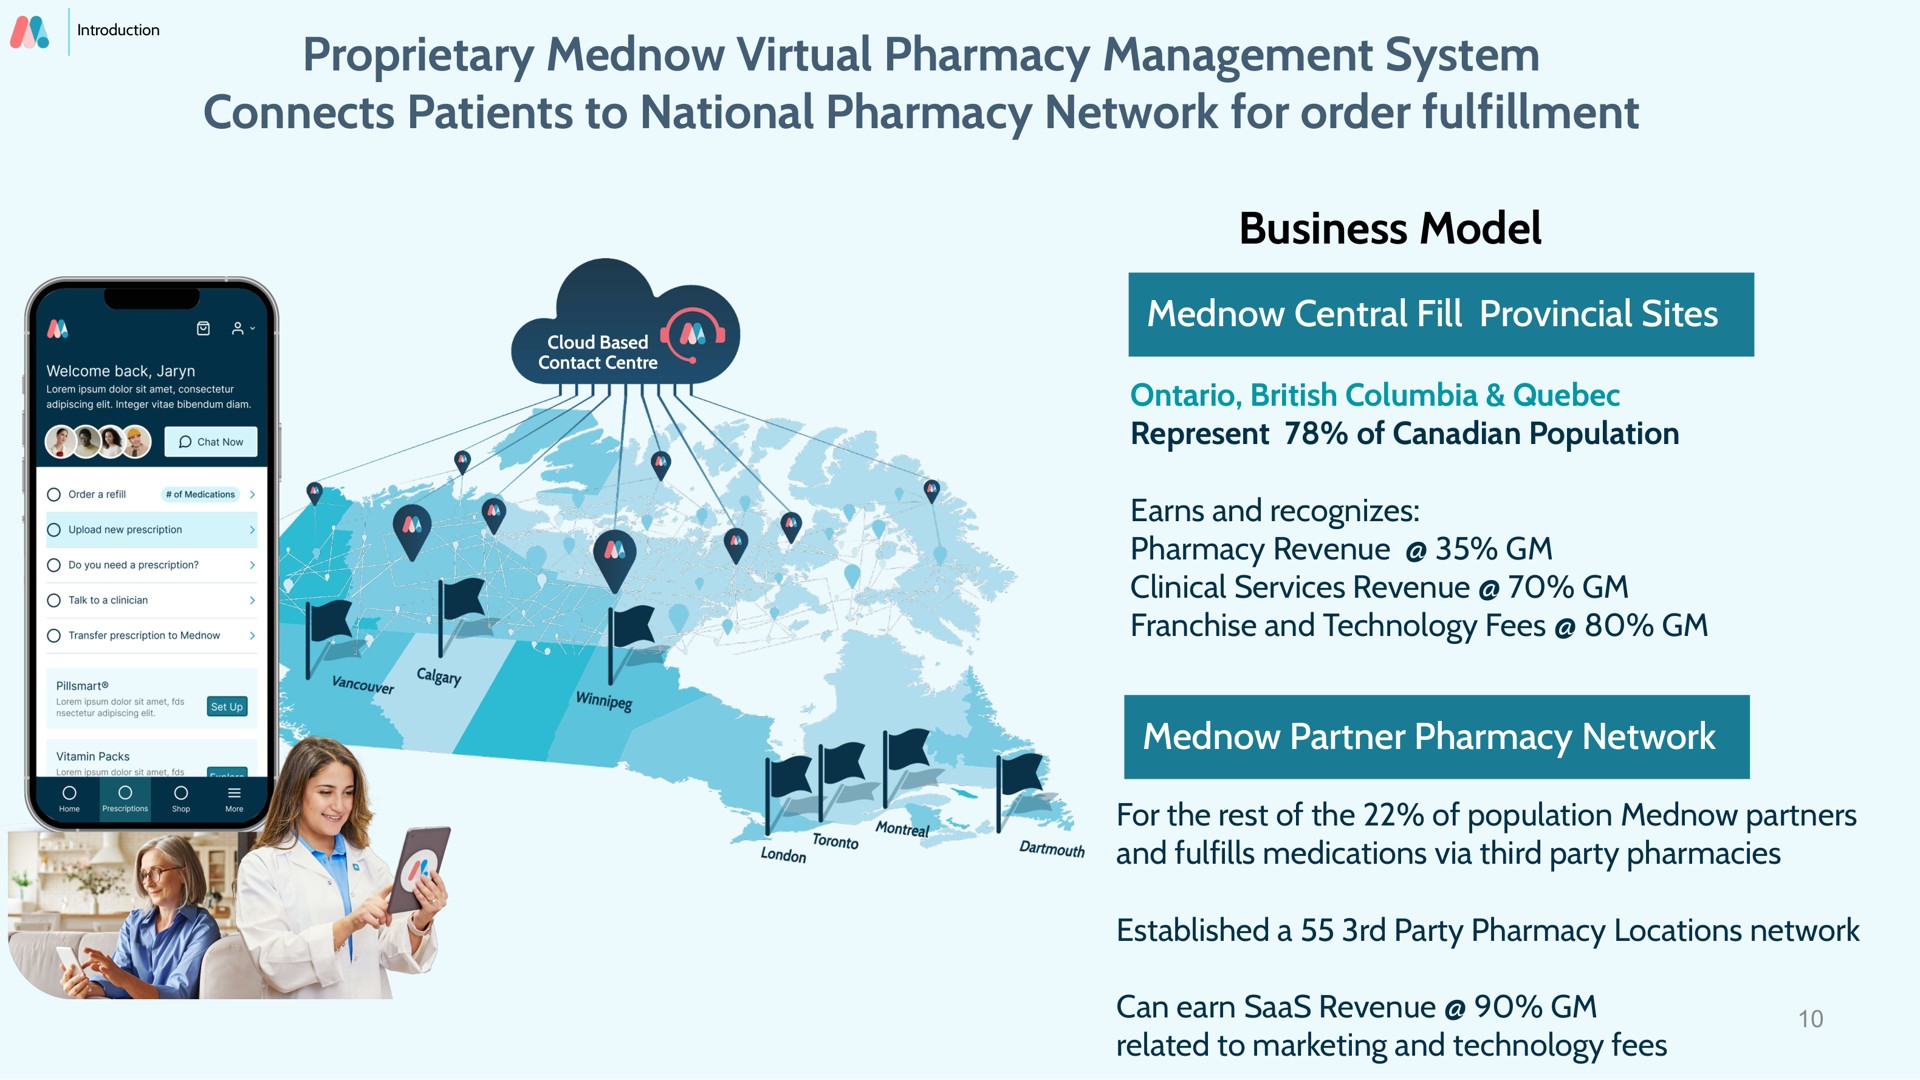 proprietary virtual pharmacy management system connects patients to national pharmacy network for order fulfillment business model | Mednow